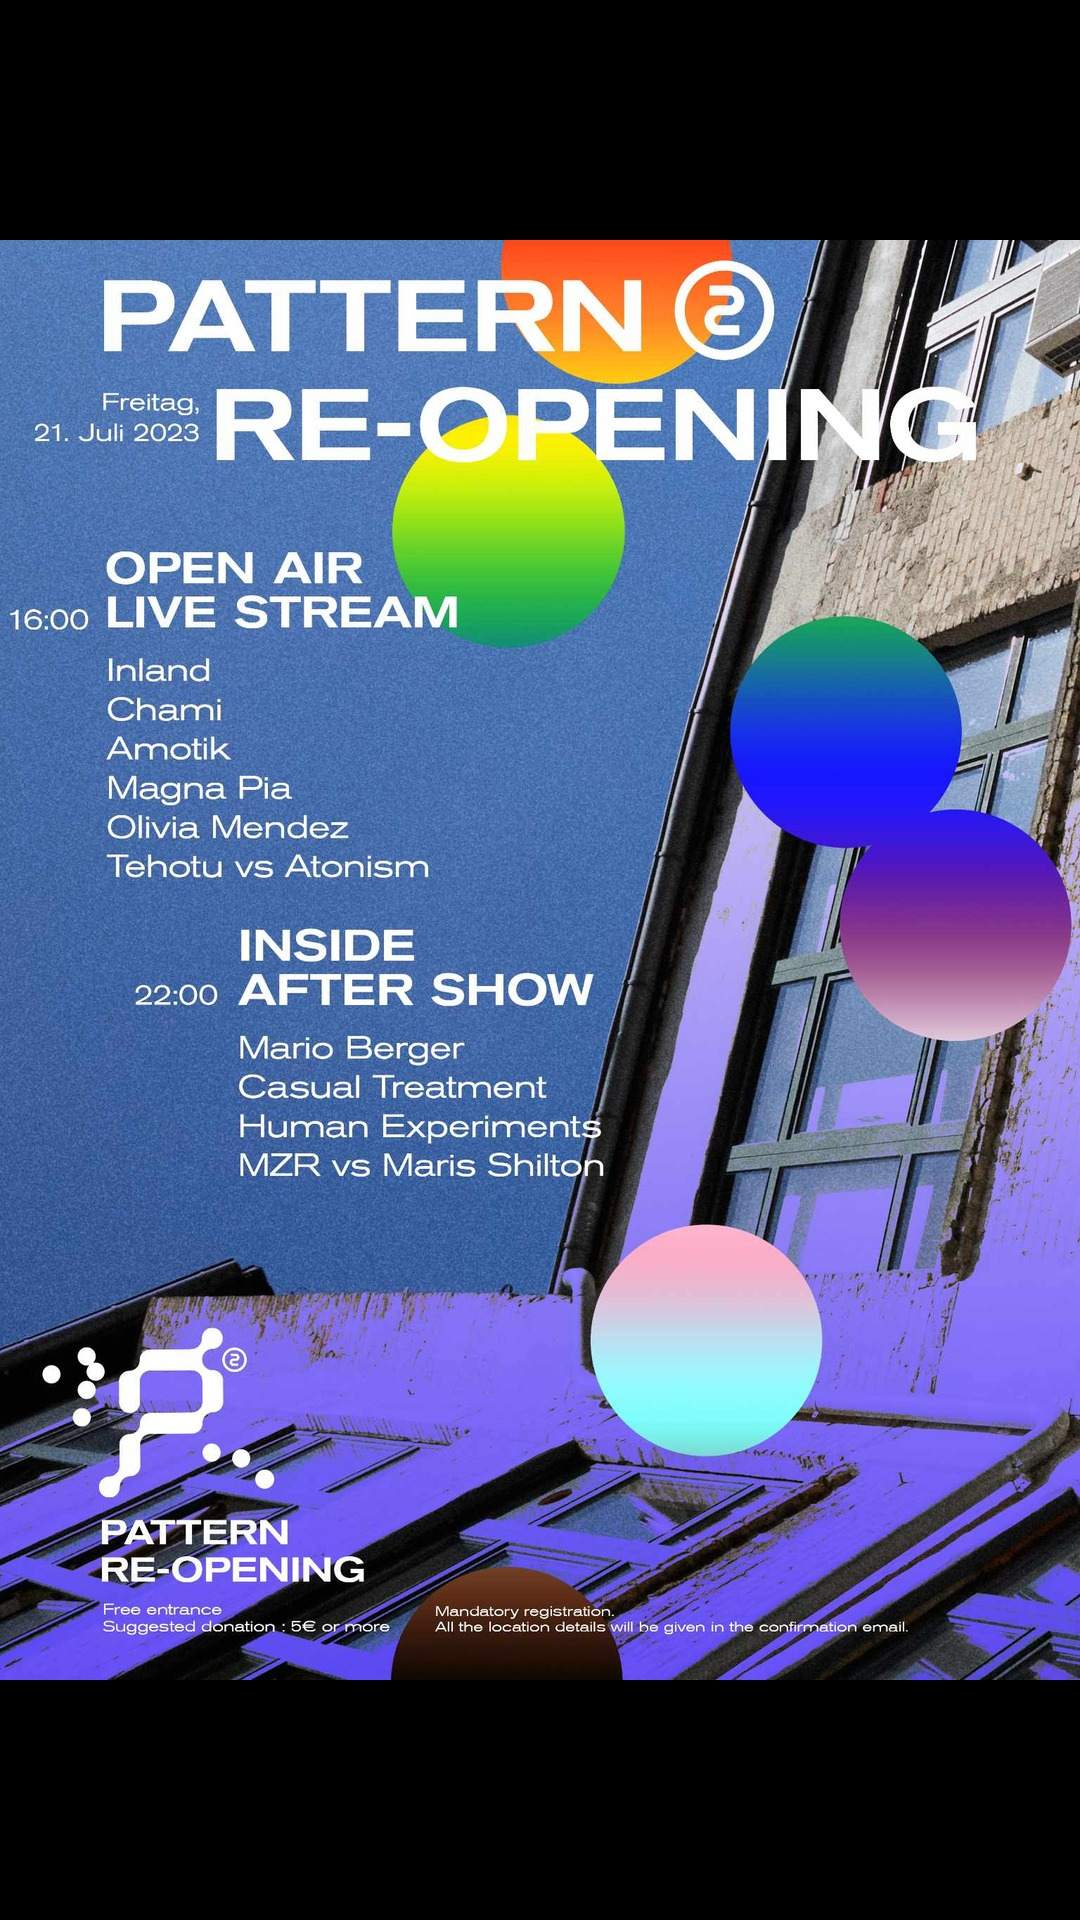  Pattern re-opening - Free entrance - フライヤー表